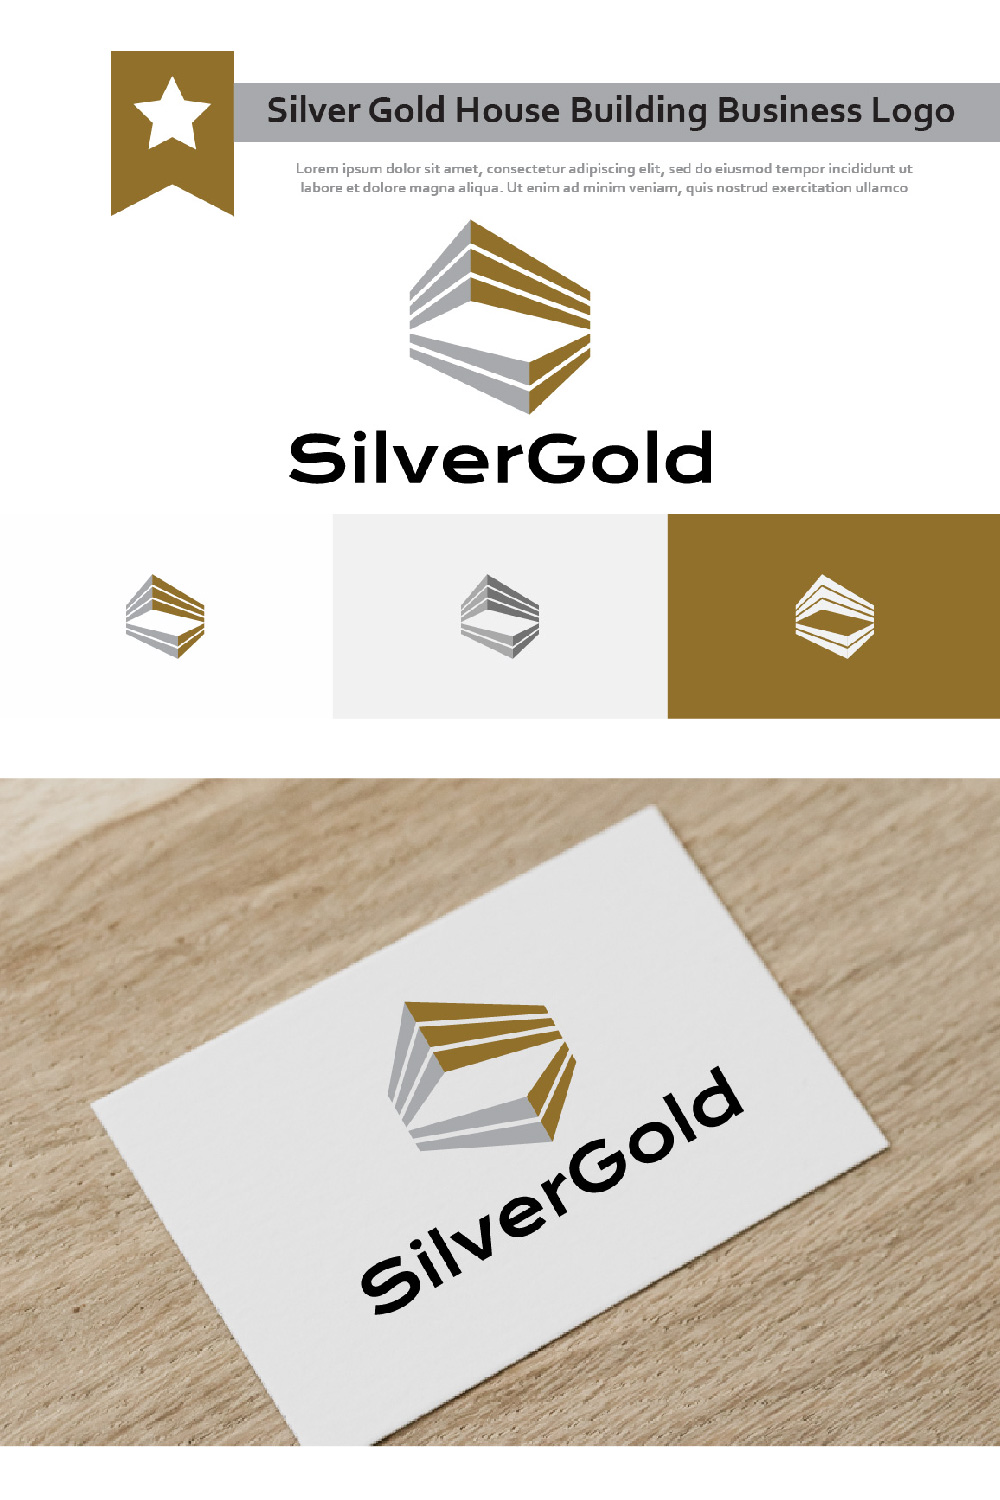 Silver Gold House Building Financial Business Abstract Logo pinterest image.